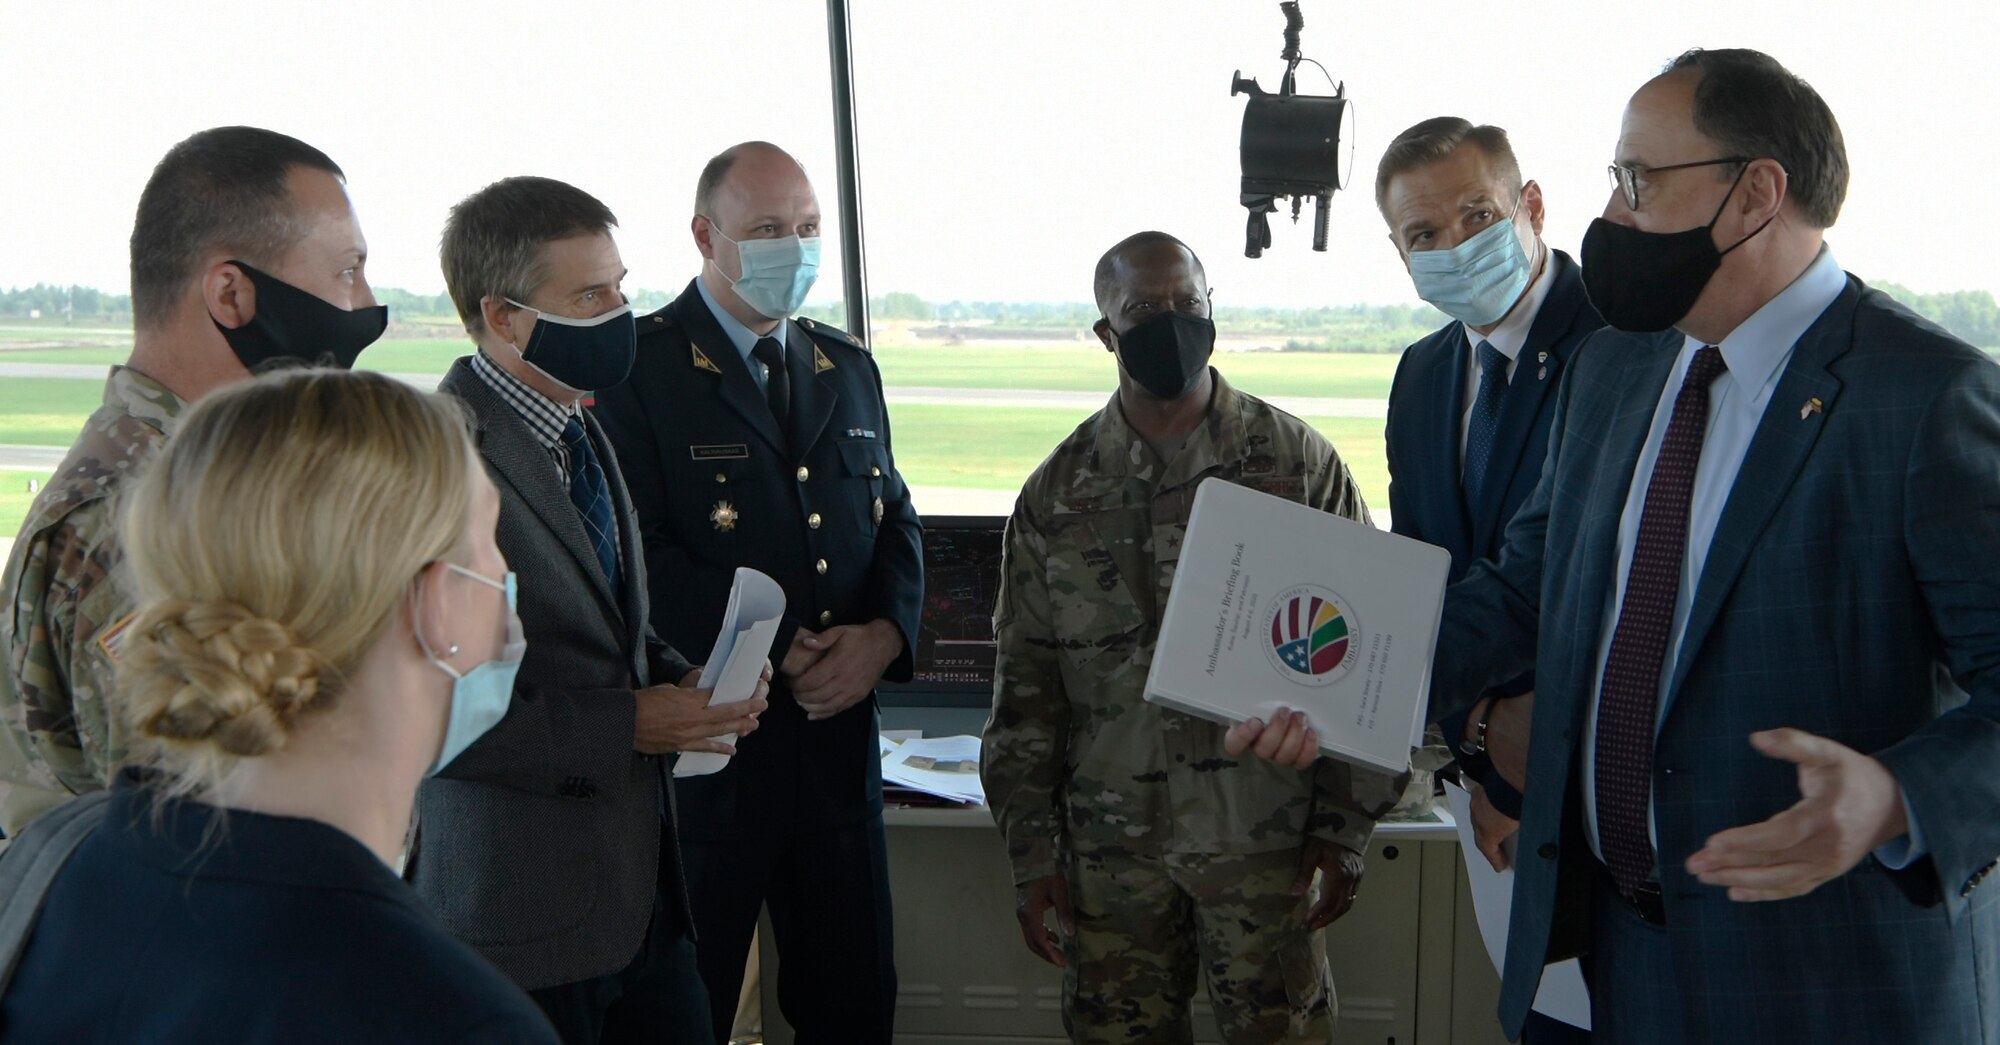 The visit marked the opening of a few facilities located on the base and provided an overview of infrastructure improvements delivered by the European Deterrence Initiative, military construction, and facility sustainment, restoration and modernization programs